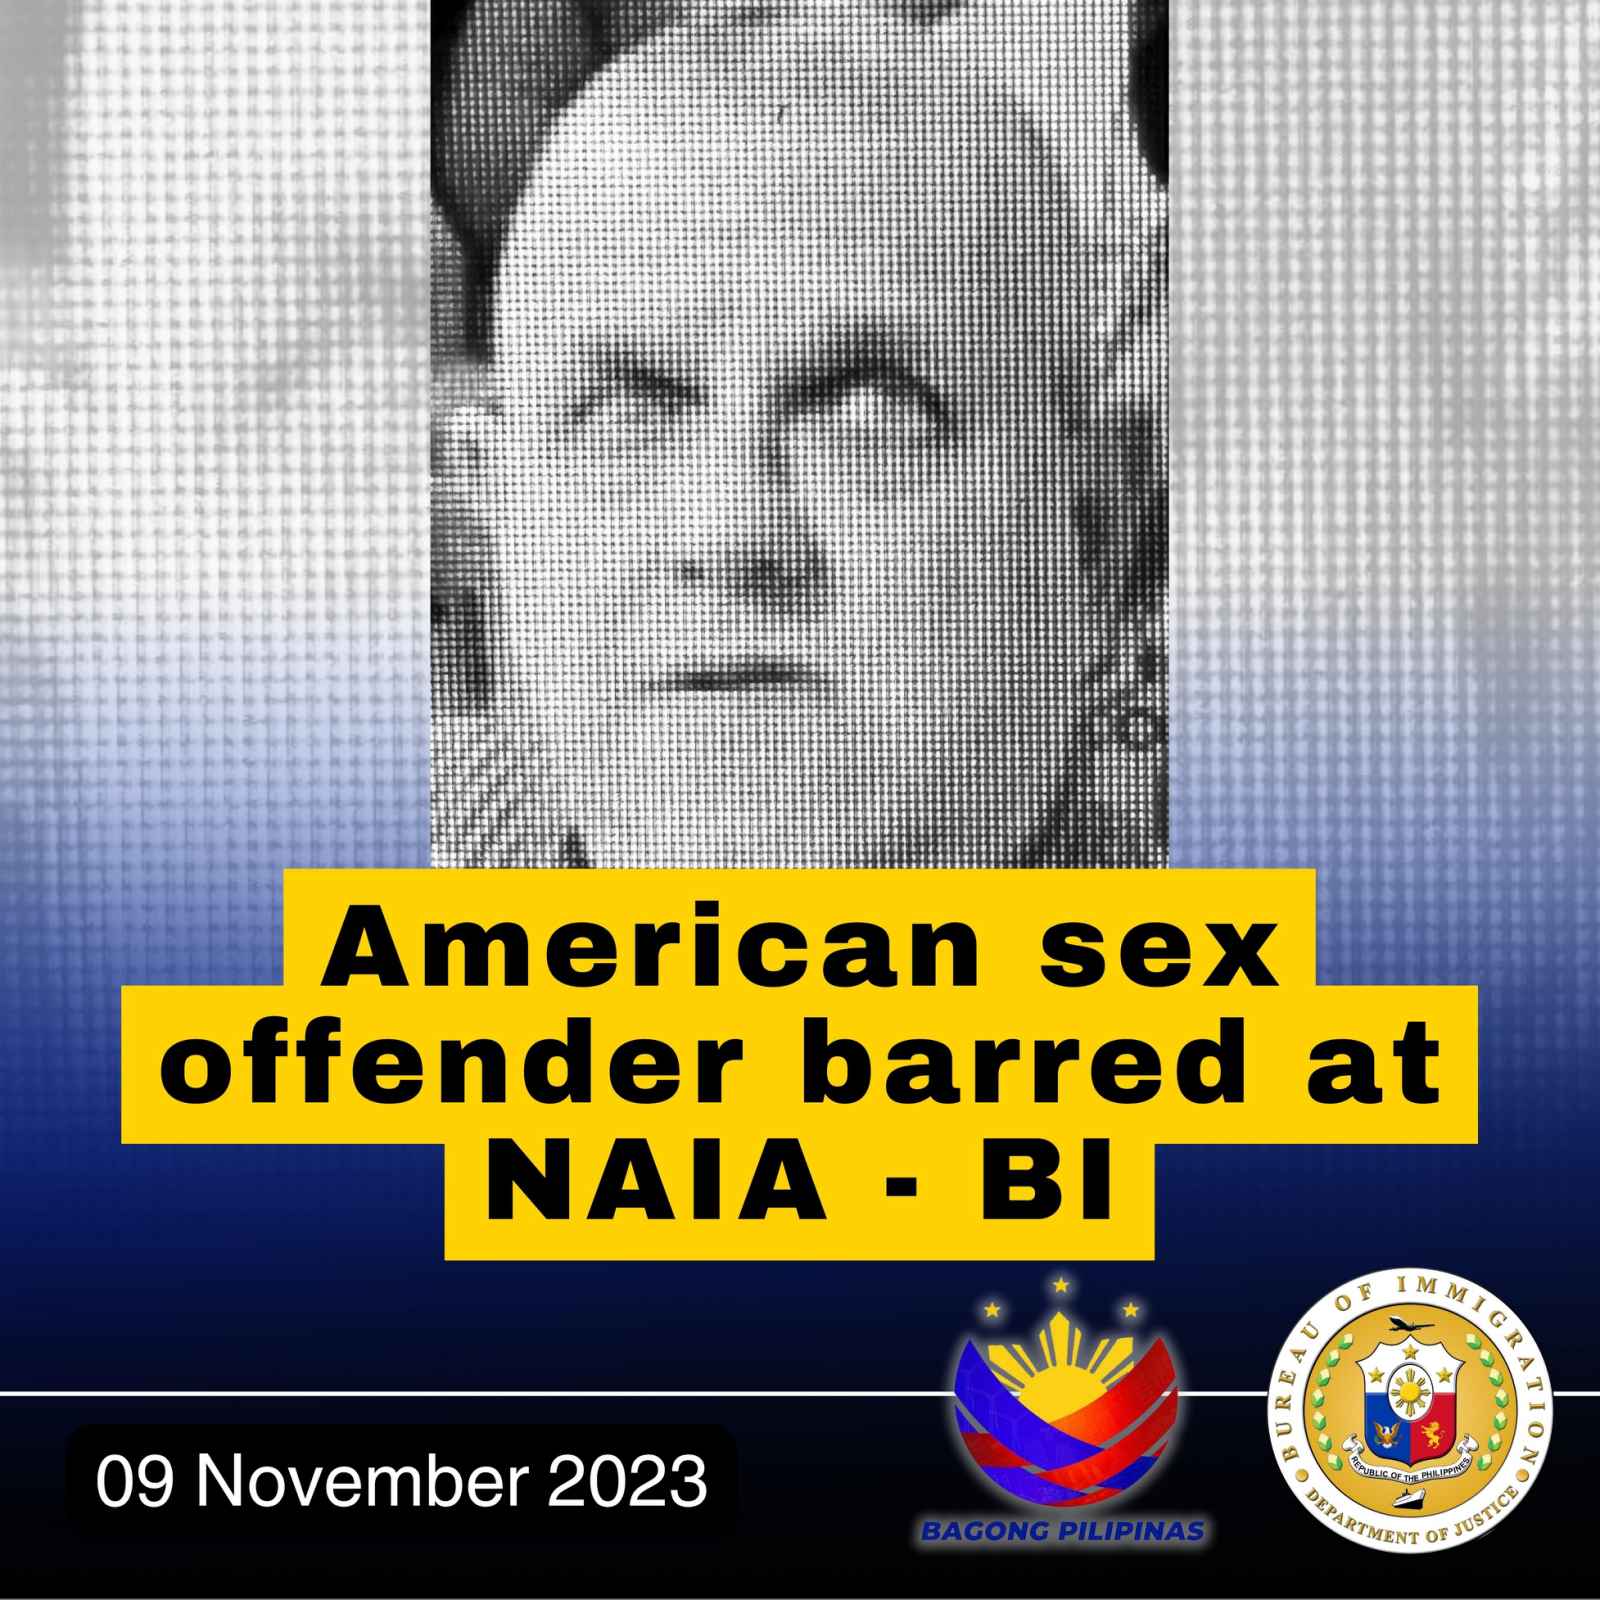 Immigration authorities did not allow an American sex offender to enter the Philippines.